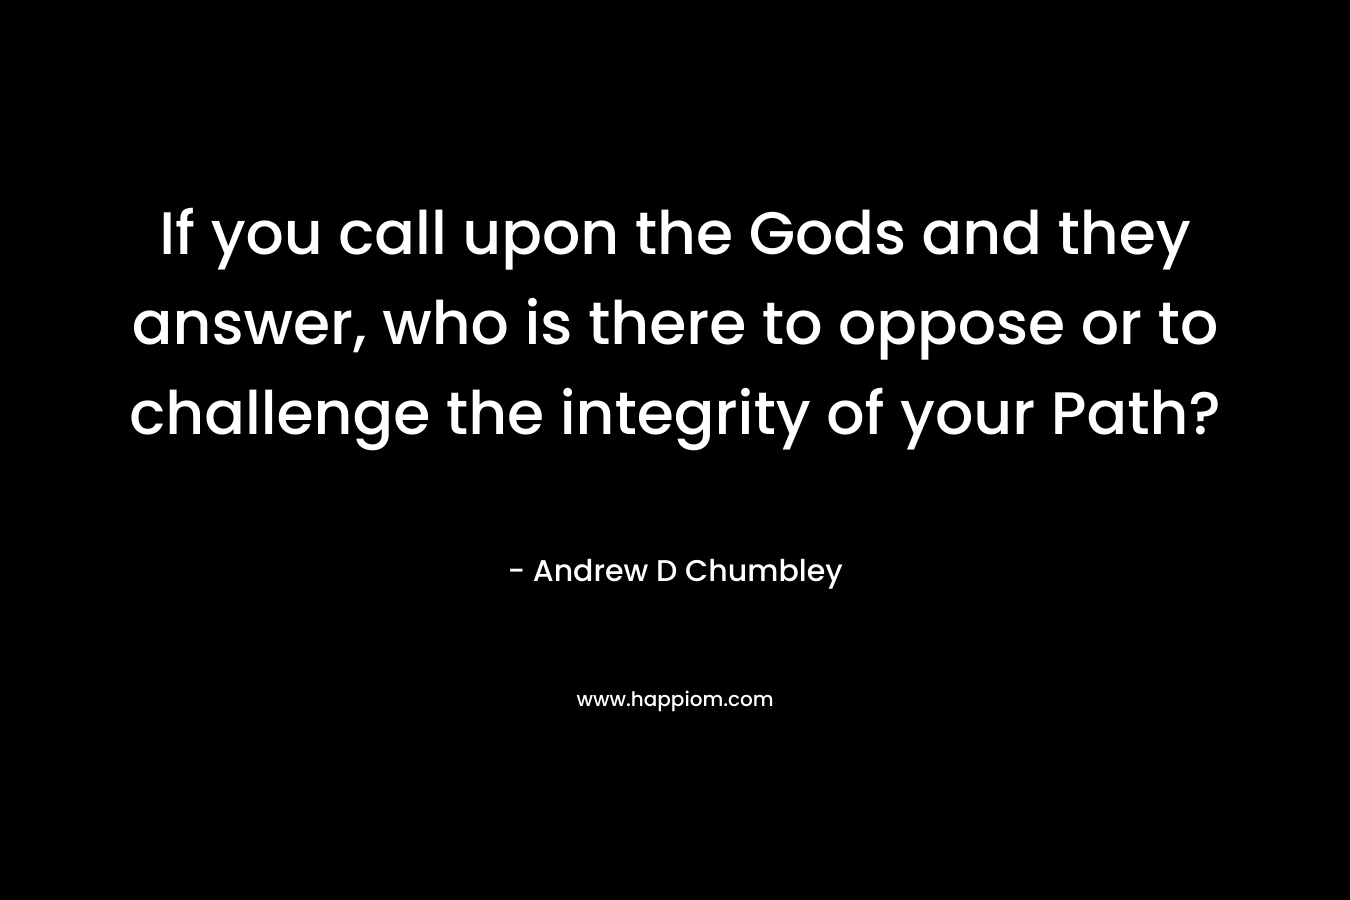 If you call upon the Gods and they answer, who is there to oppose or to challenge the integrity of your Path?